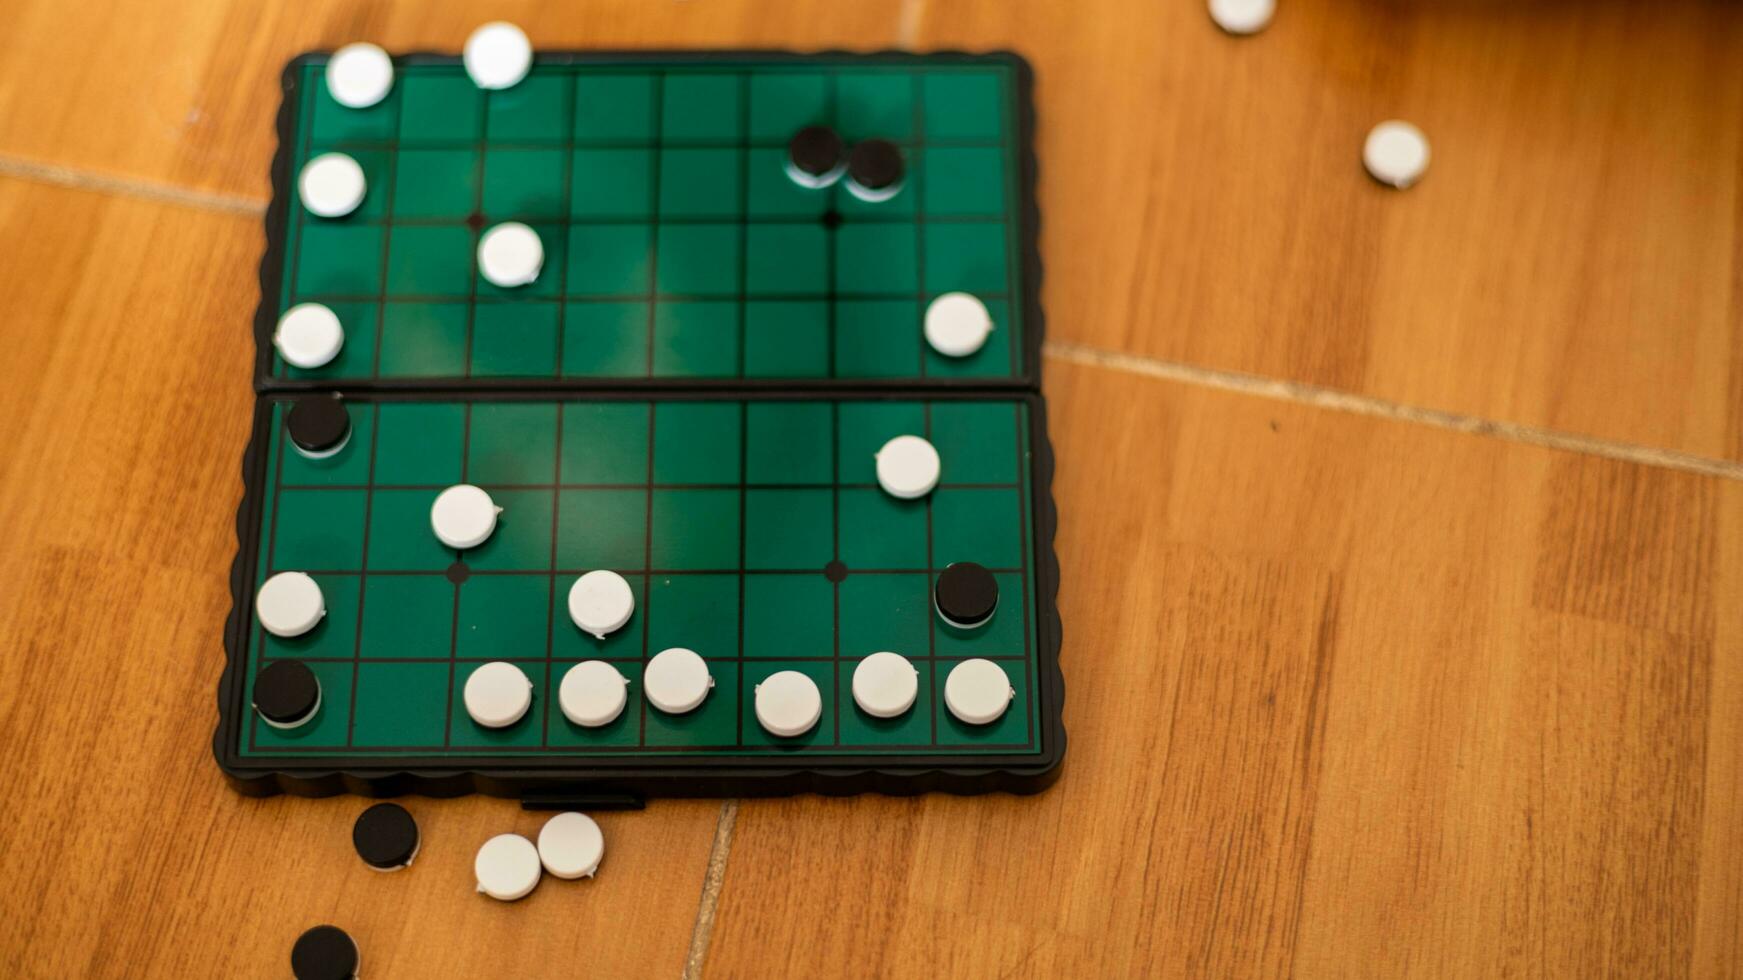 White and black stones are placed on a wooden board for playing Go. photo